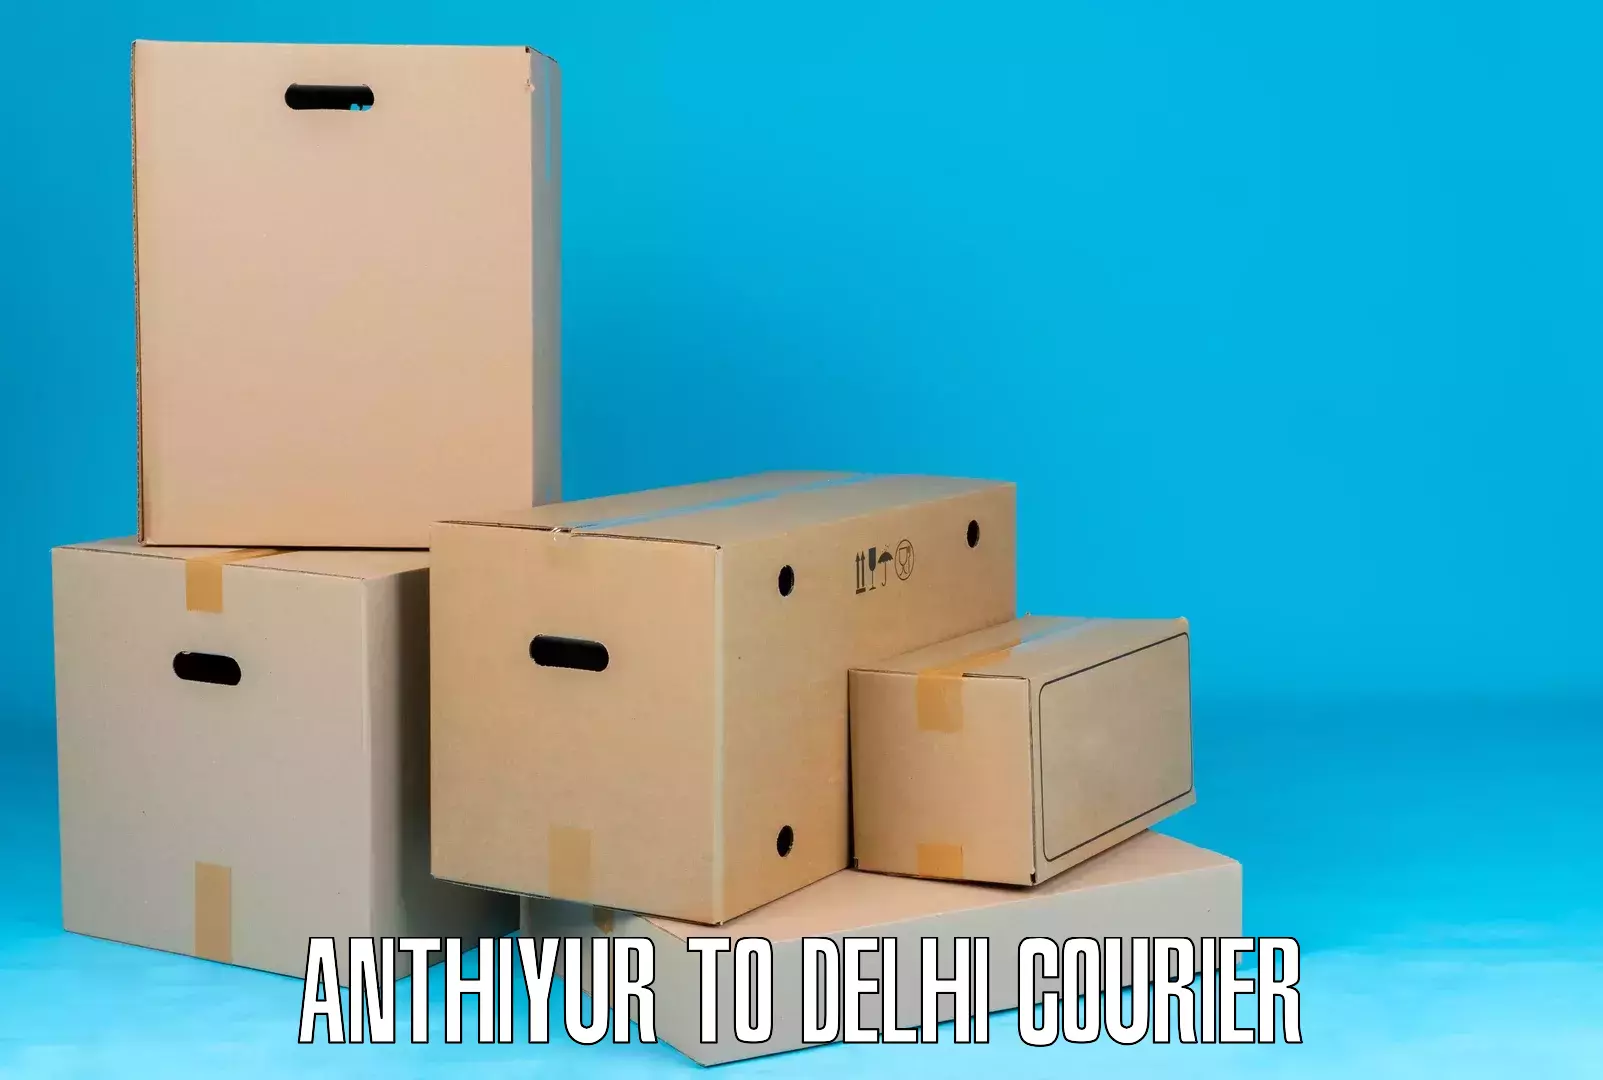 Global courier networks Anthiyur to Lodhi Road